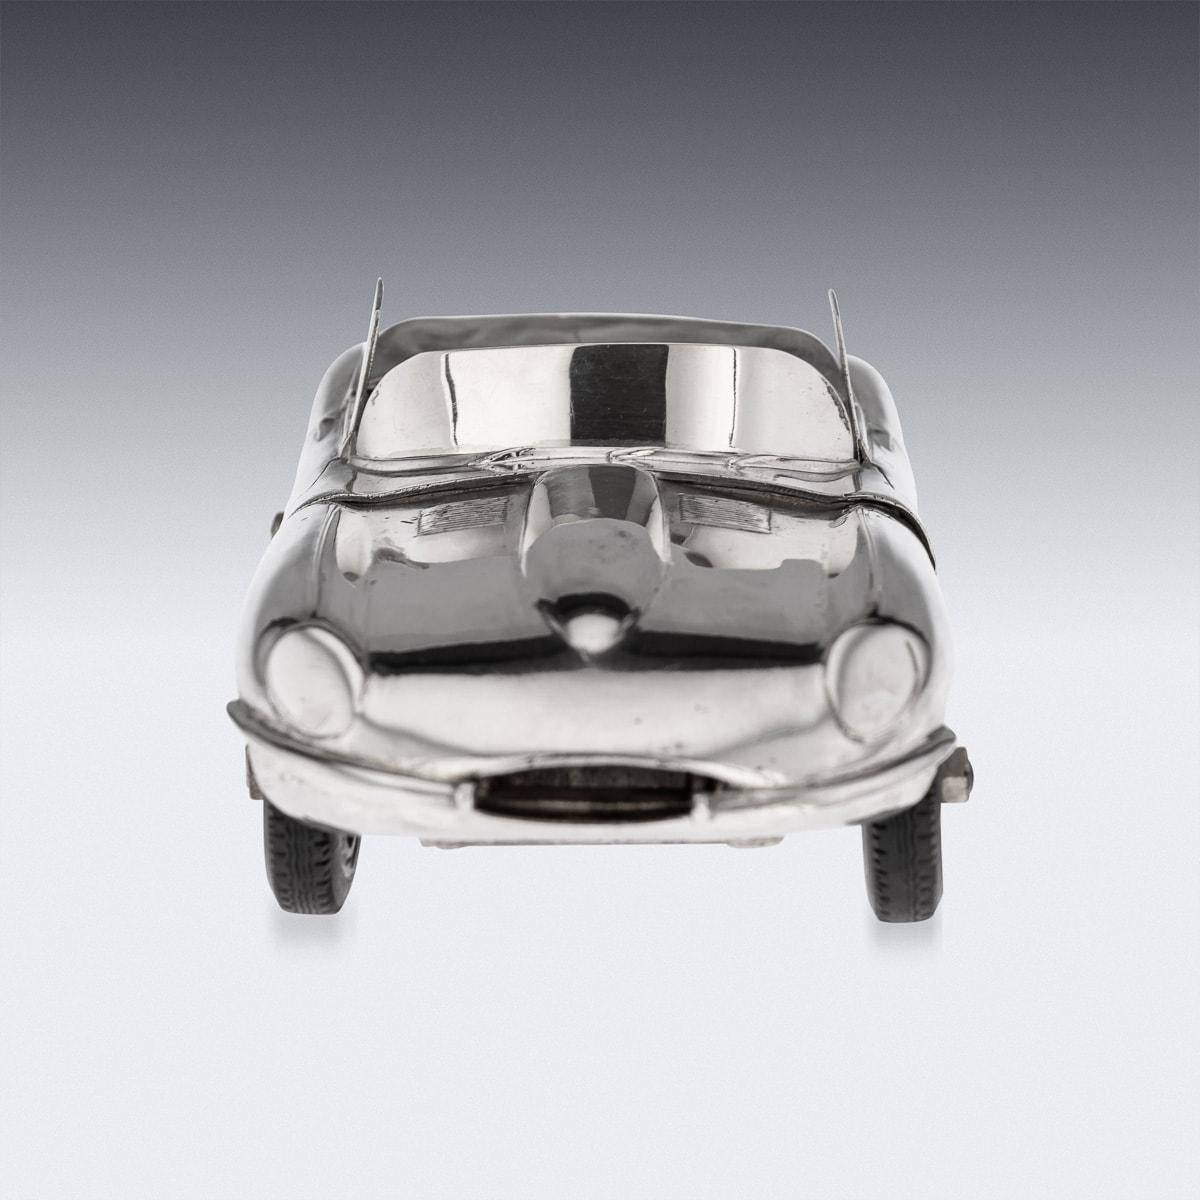 20th Century Solid Silver Jaguar E-Type Model Of A Car, L Donati, c.1960 In Good Condition For Sale In Royal Tunbridge Wells, Kent